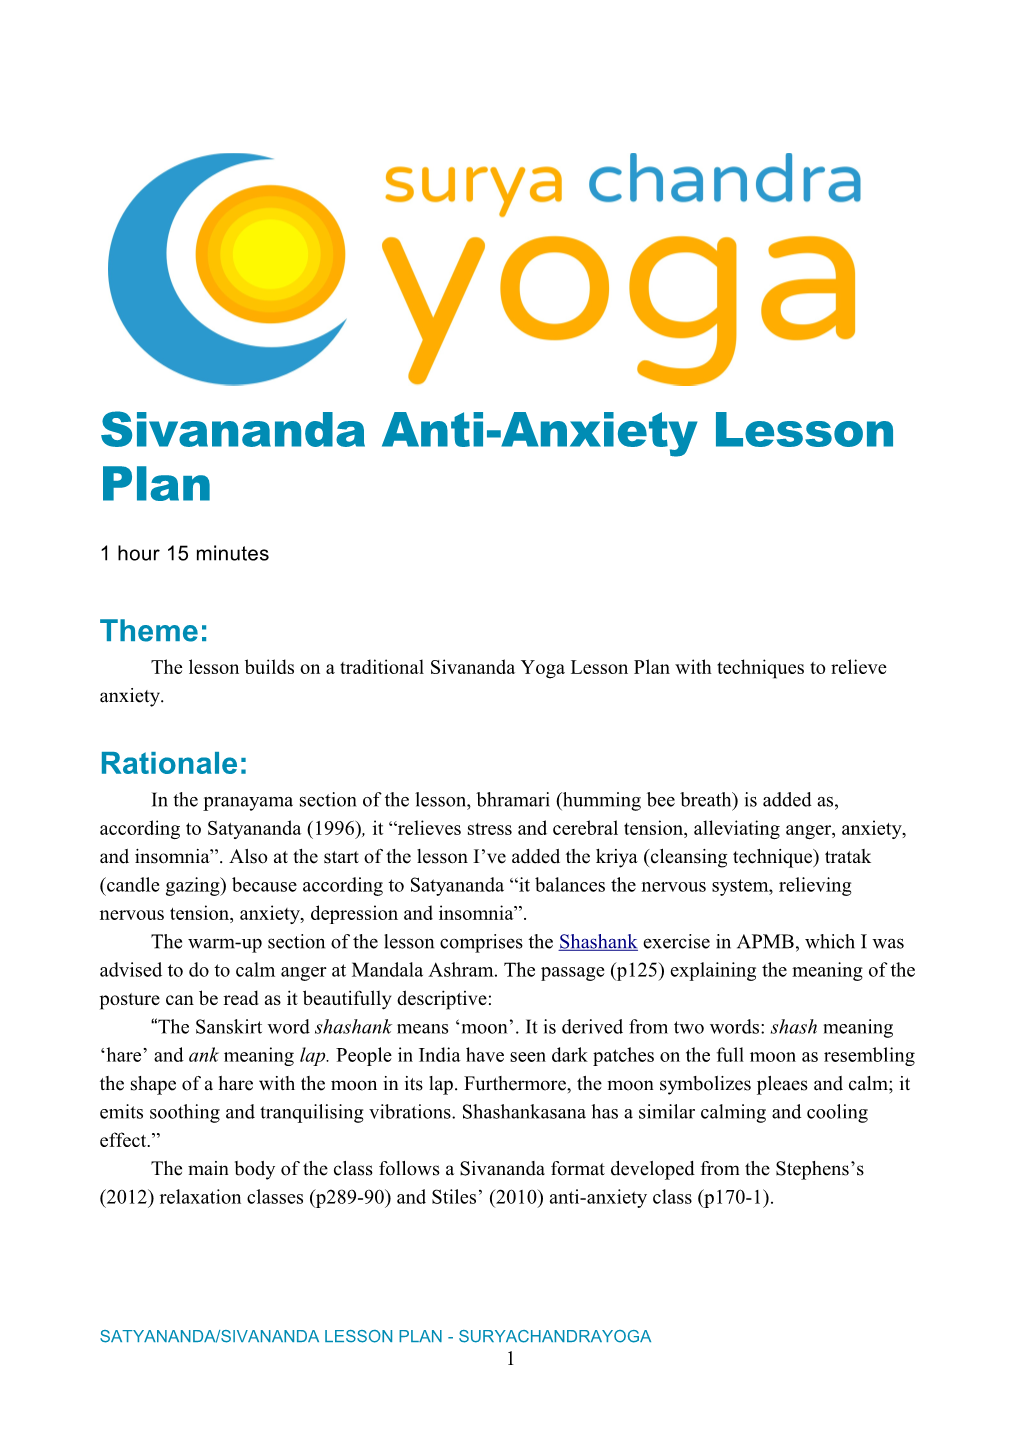 The Lesson Builds on a Traditional Sivananda Yoga Lesson Plan with Techniques to Relieve